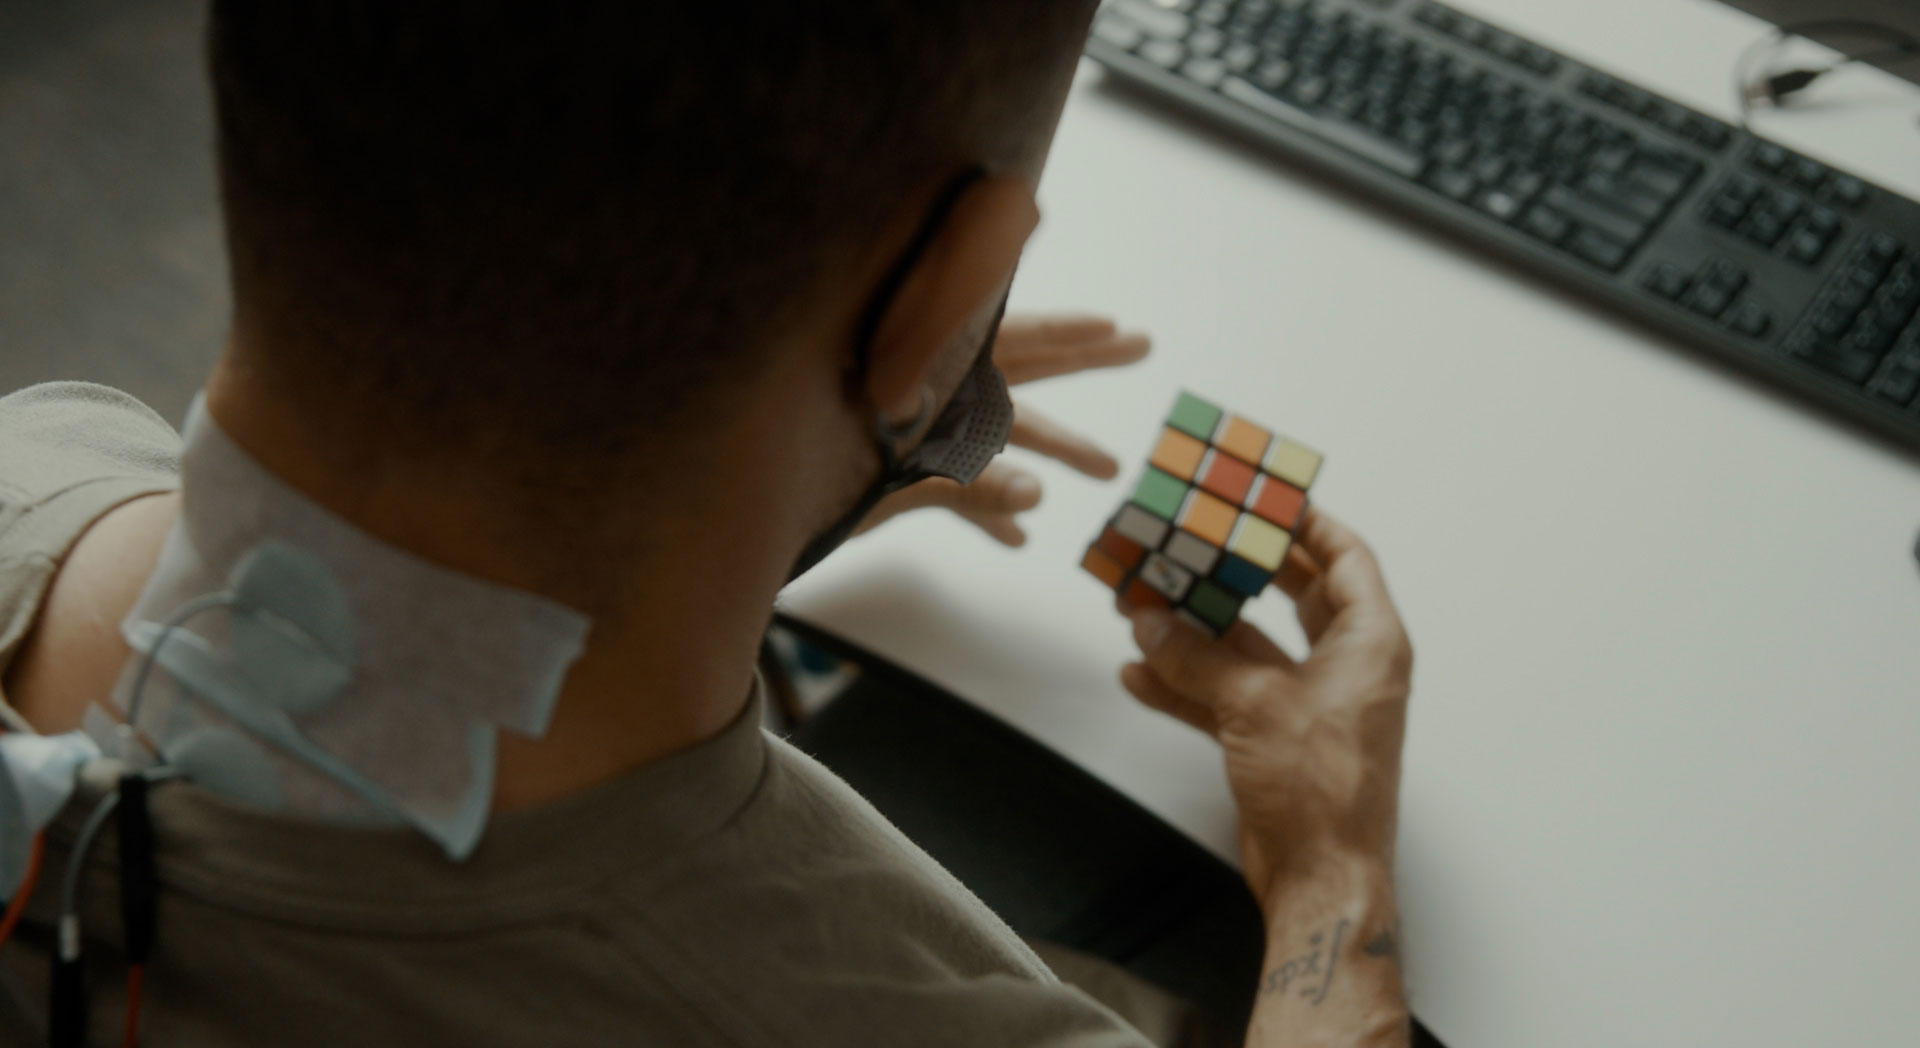 A man with electrodes taped over his spine does a Rubiks Cube.